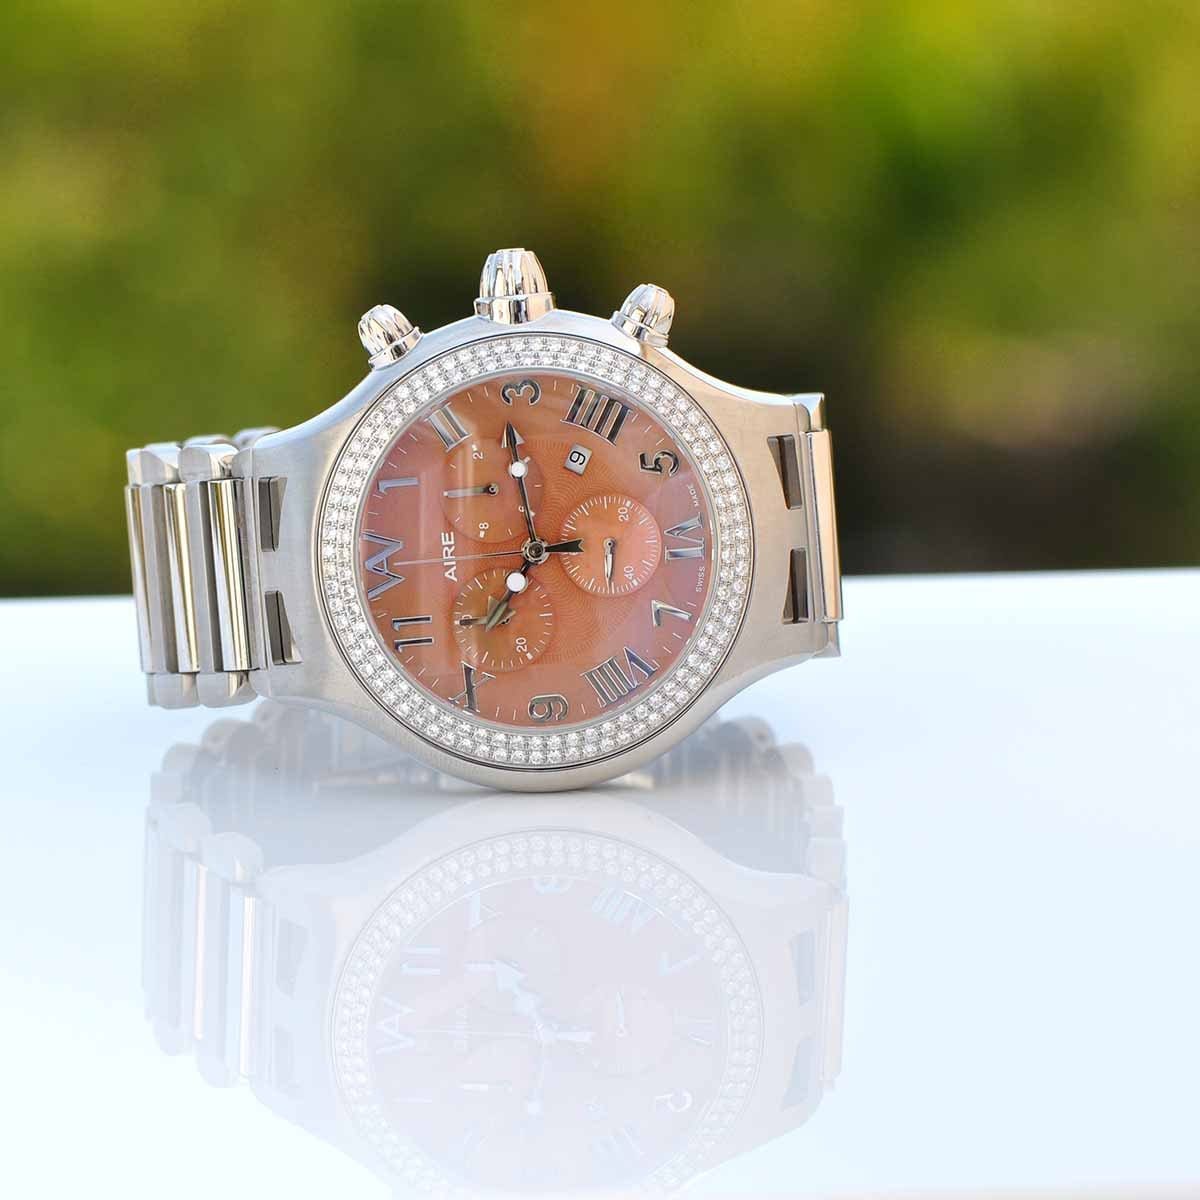 CHRIS AIRE WATCH - PARLAY CHRONOGRAPH - Chris Aire Fine Jewelry & Timepieces